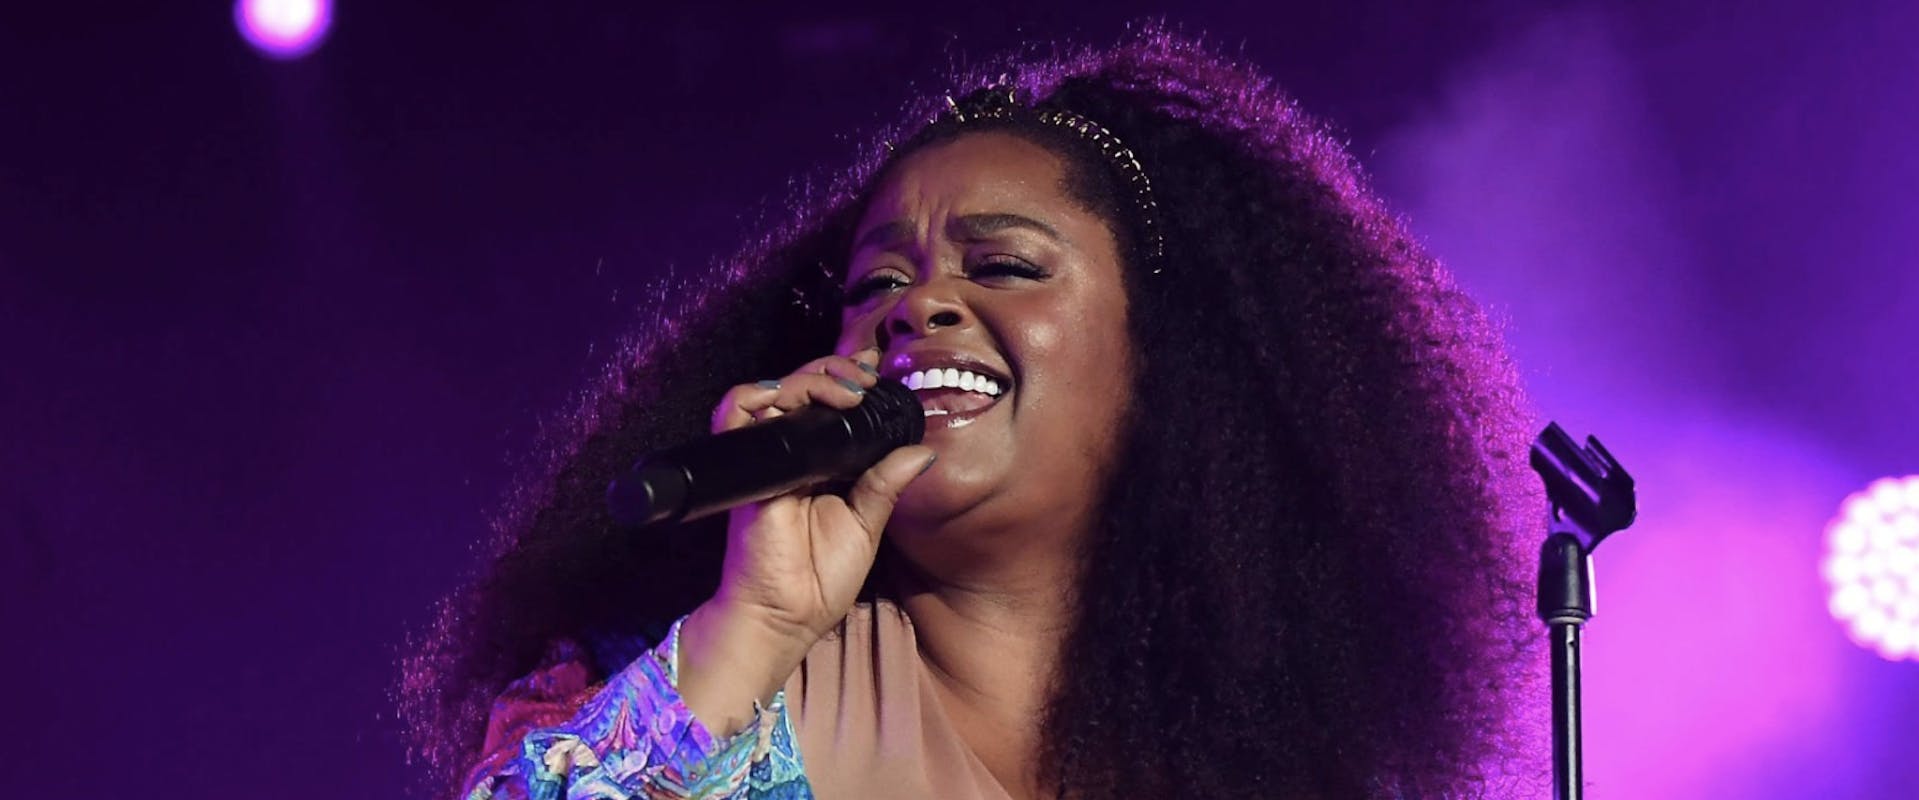 Jill Scott performs onstage during the 2018 Essence Festival presented By Coca-Cola - Day 1 at Louisiana Superdome on July 6, 2018 in New Orleans, Louisiana. 